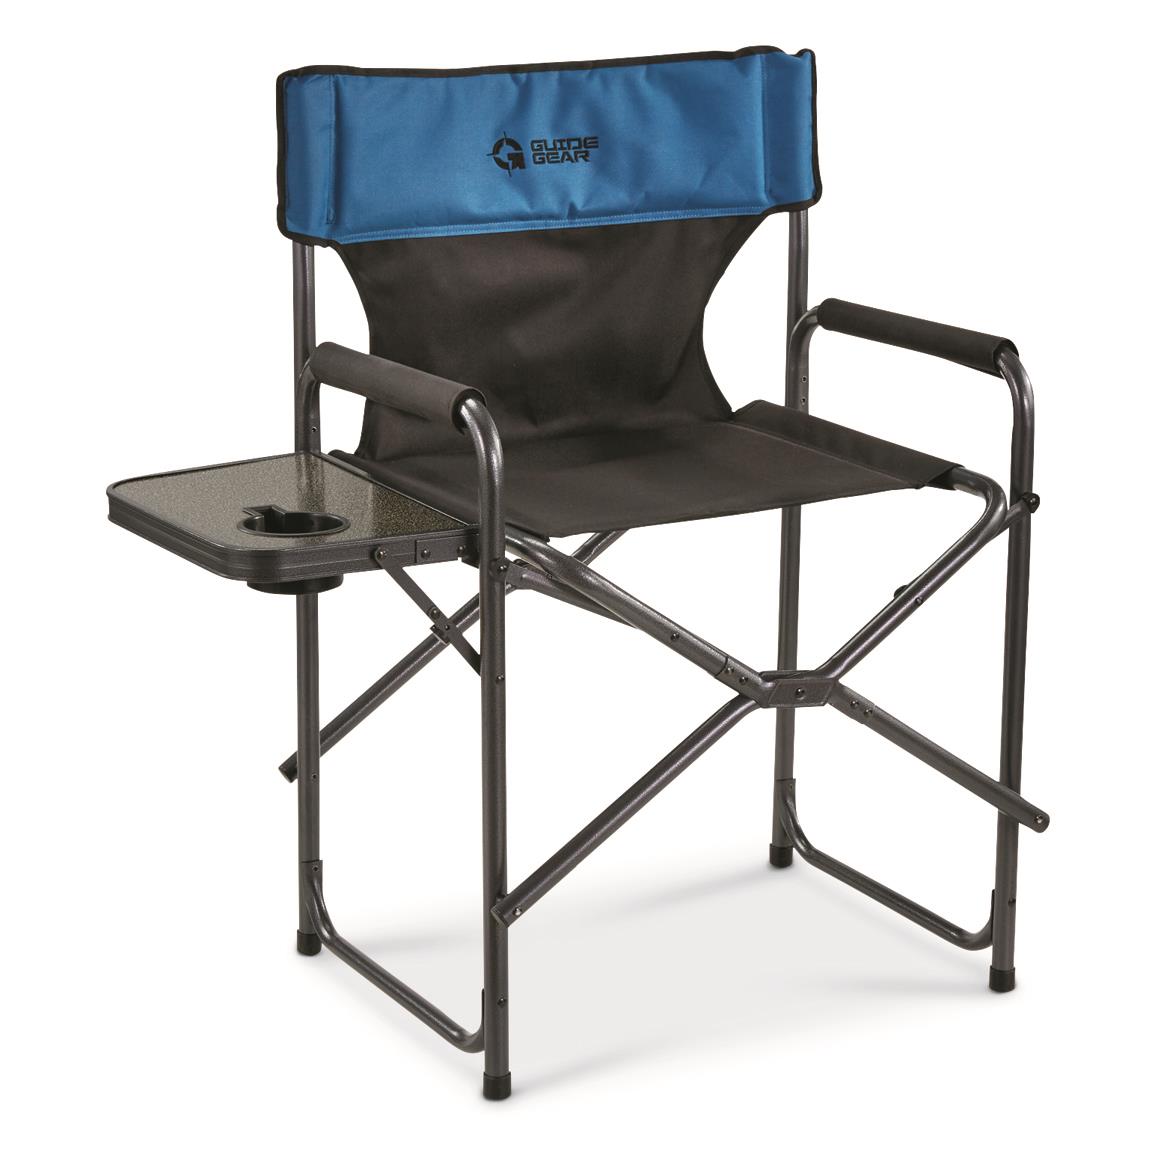 Heavy Duty Big & Tall Outdoor Oversized XL Chair 500 Pds Ect Camping Fishing 